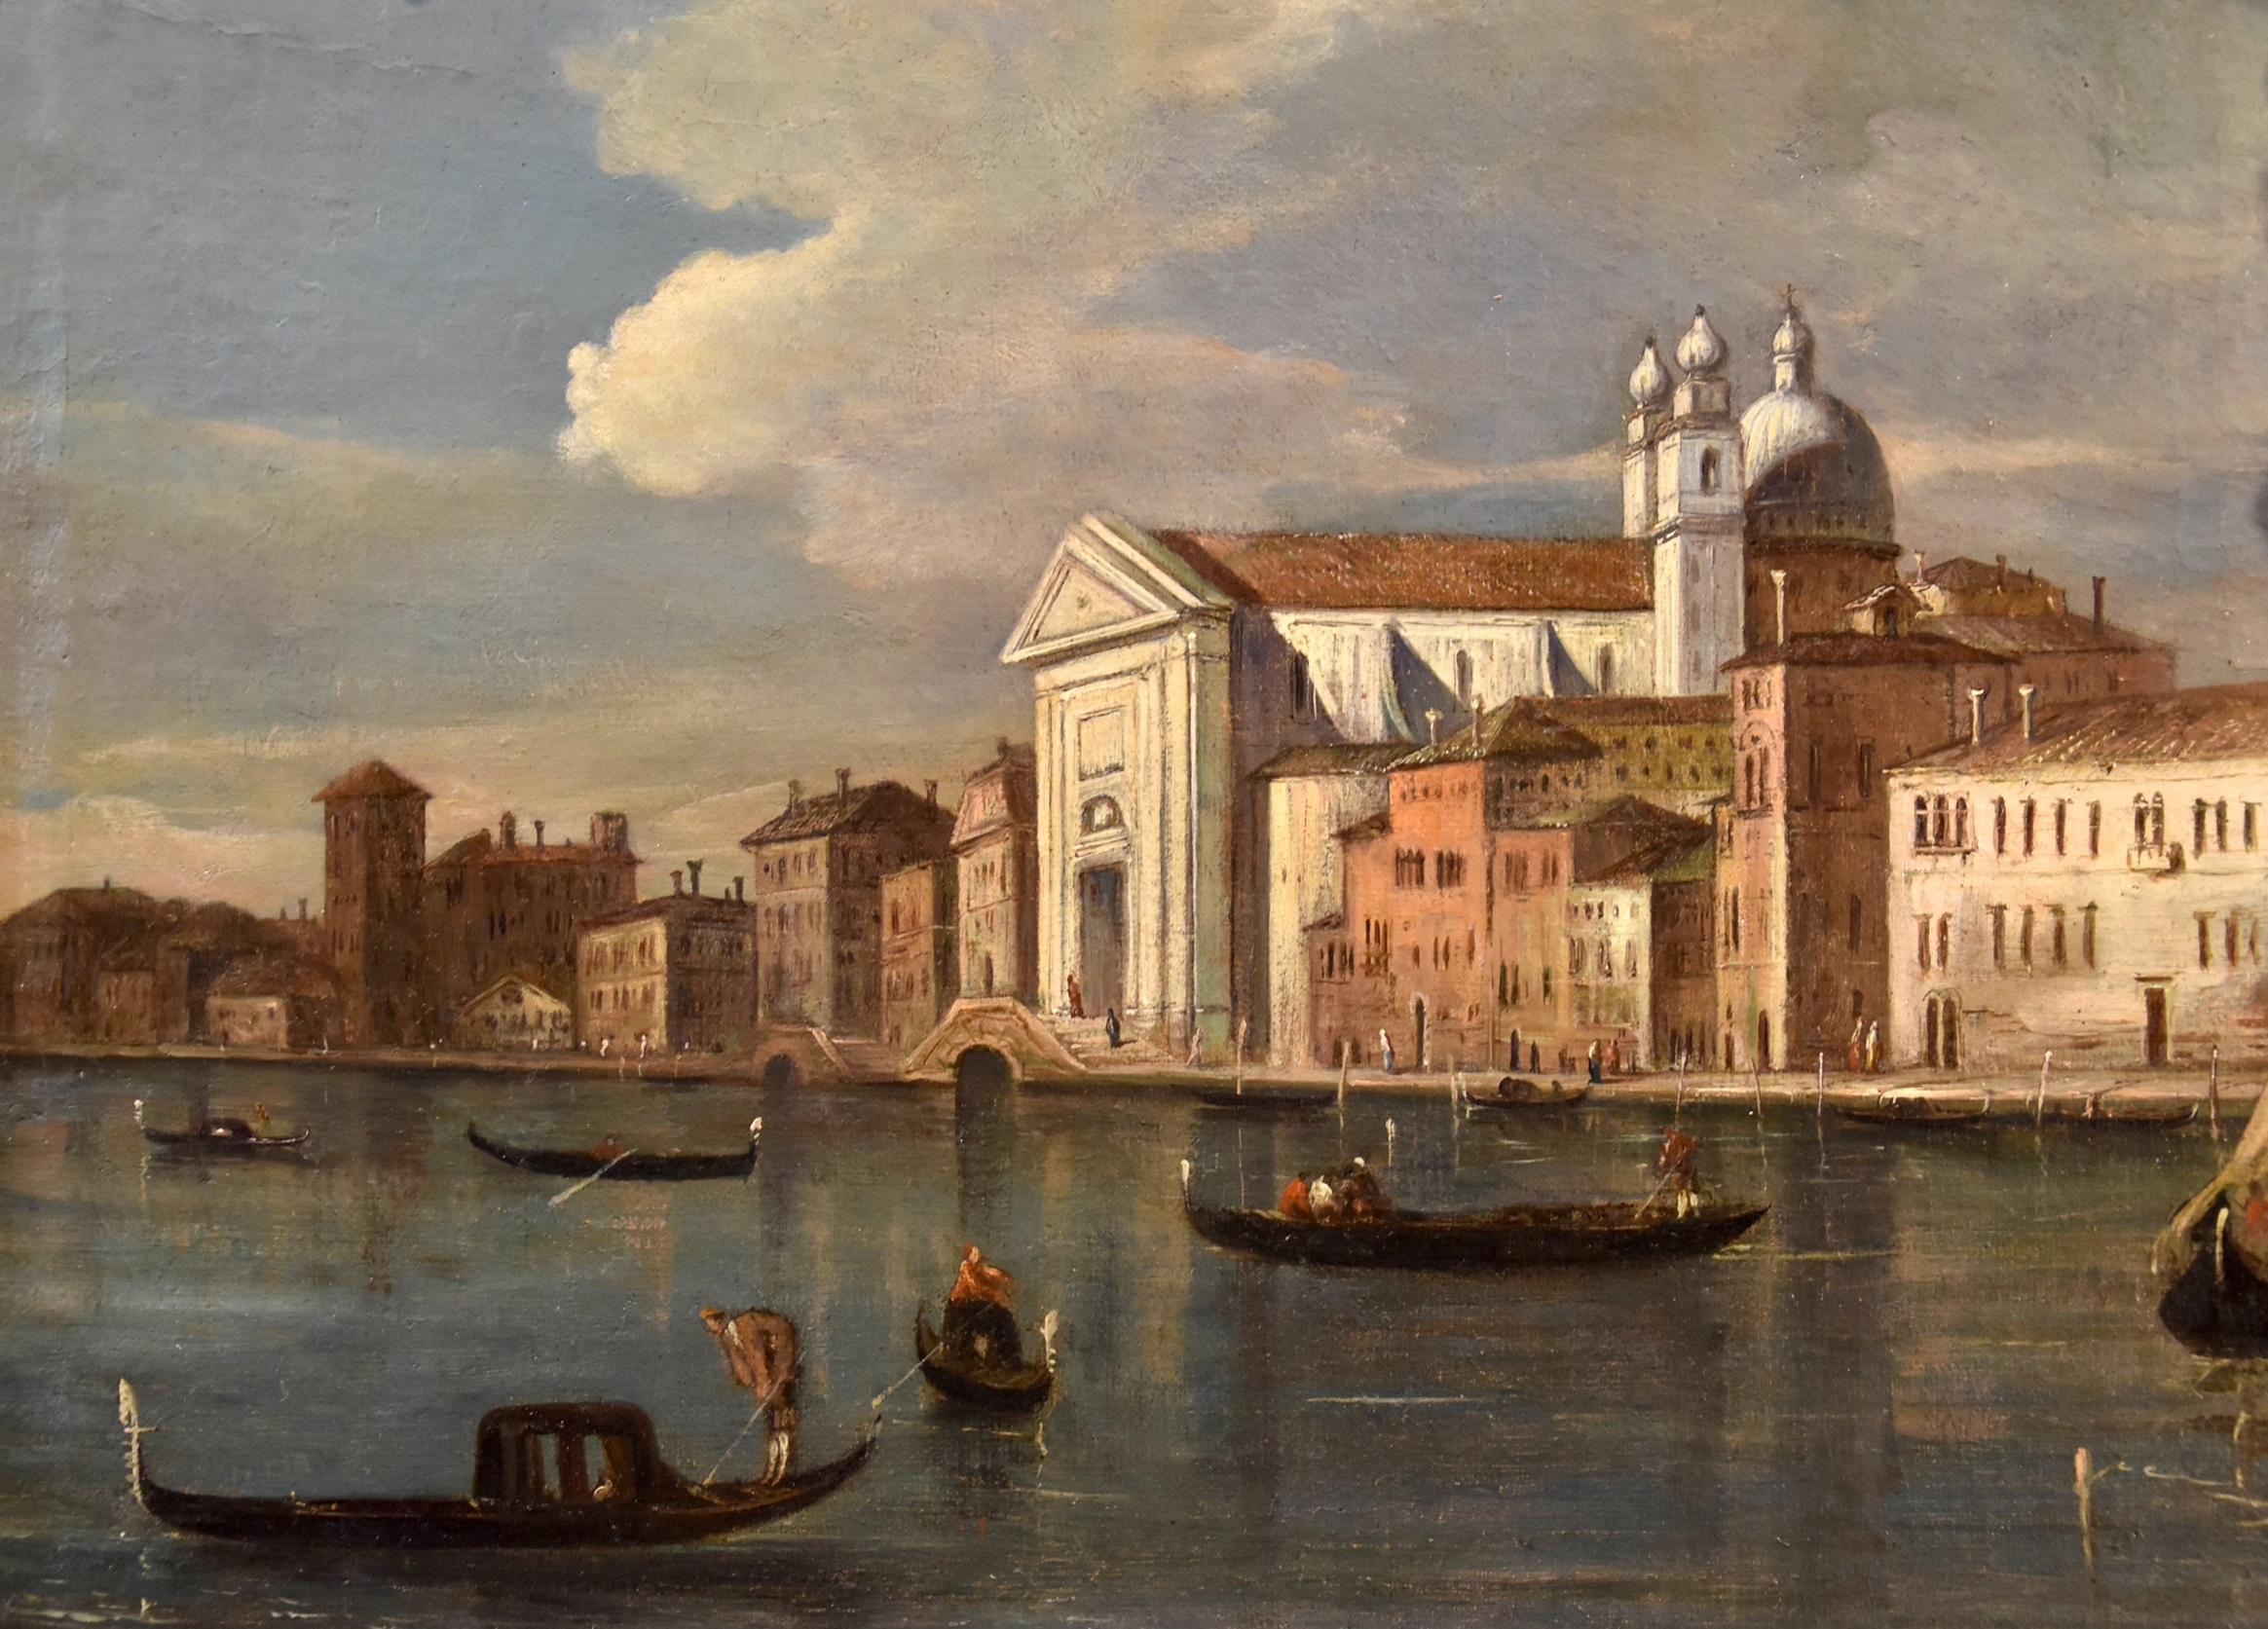 View Venice See Giudecca Guardi 18/19th Century Paint Oil on canvas Old master - Painting by Giacomo Guardi (venice, 1764 - 1835)